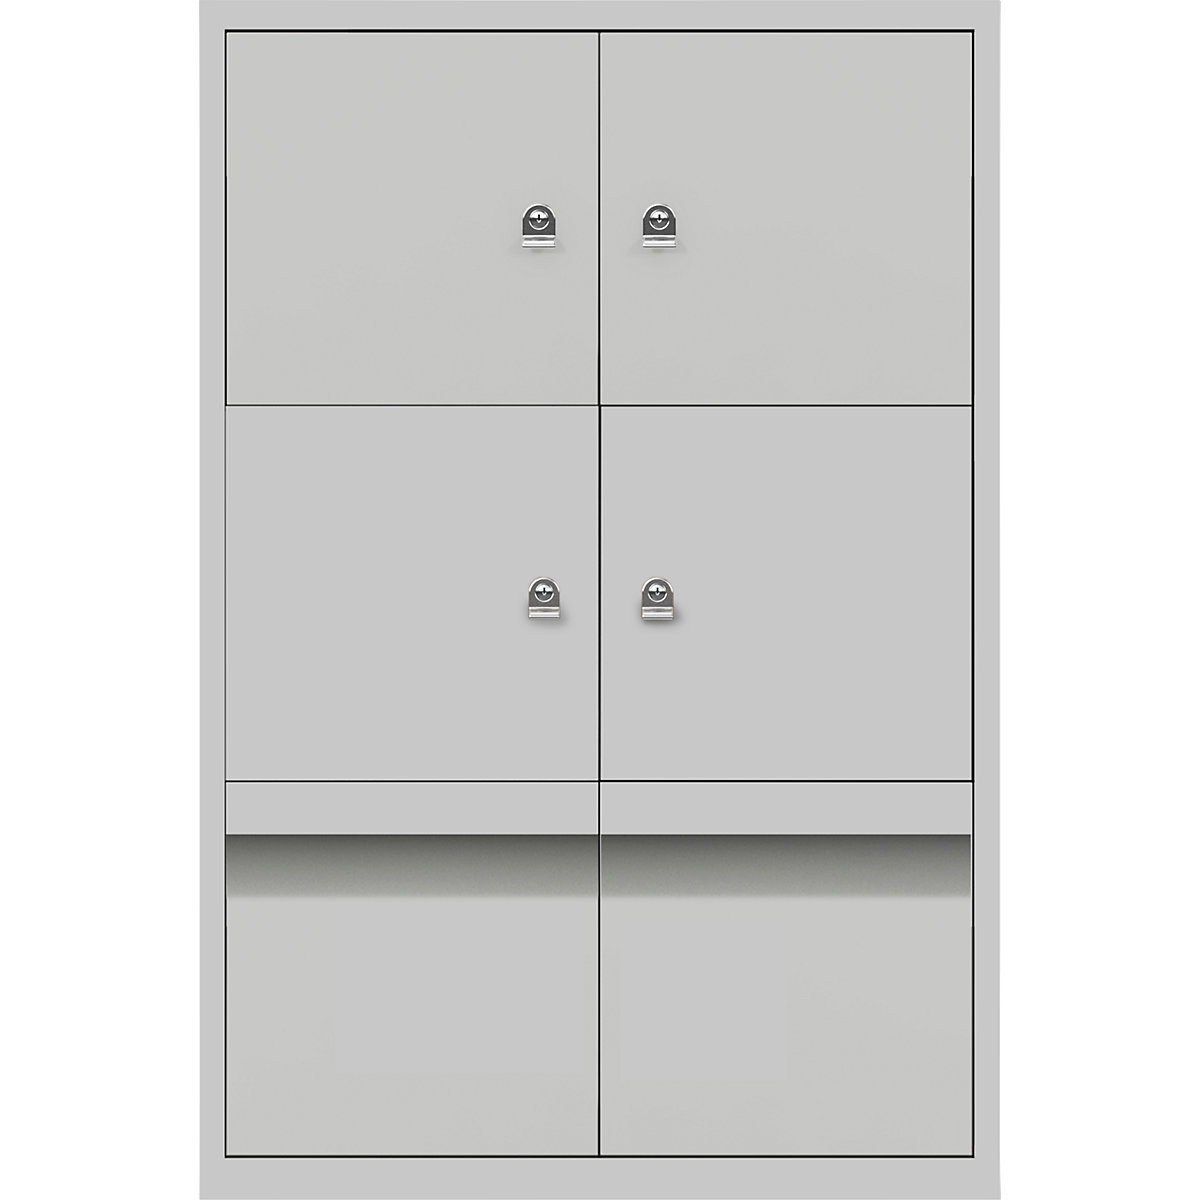 LateralFile™ lodge – BISLEY, with 4 lockable compartments and 2 drawers, height 375 mm each, goose grey-6